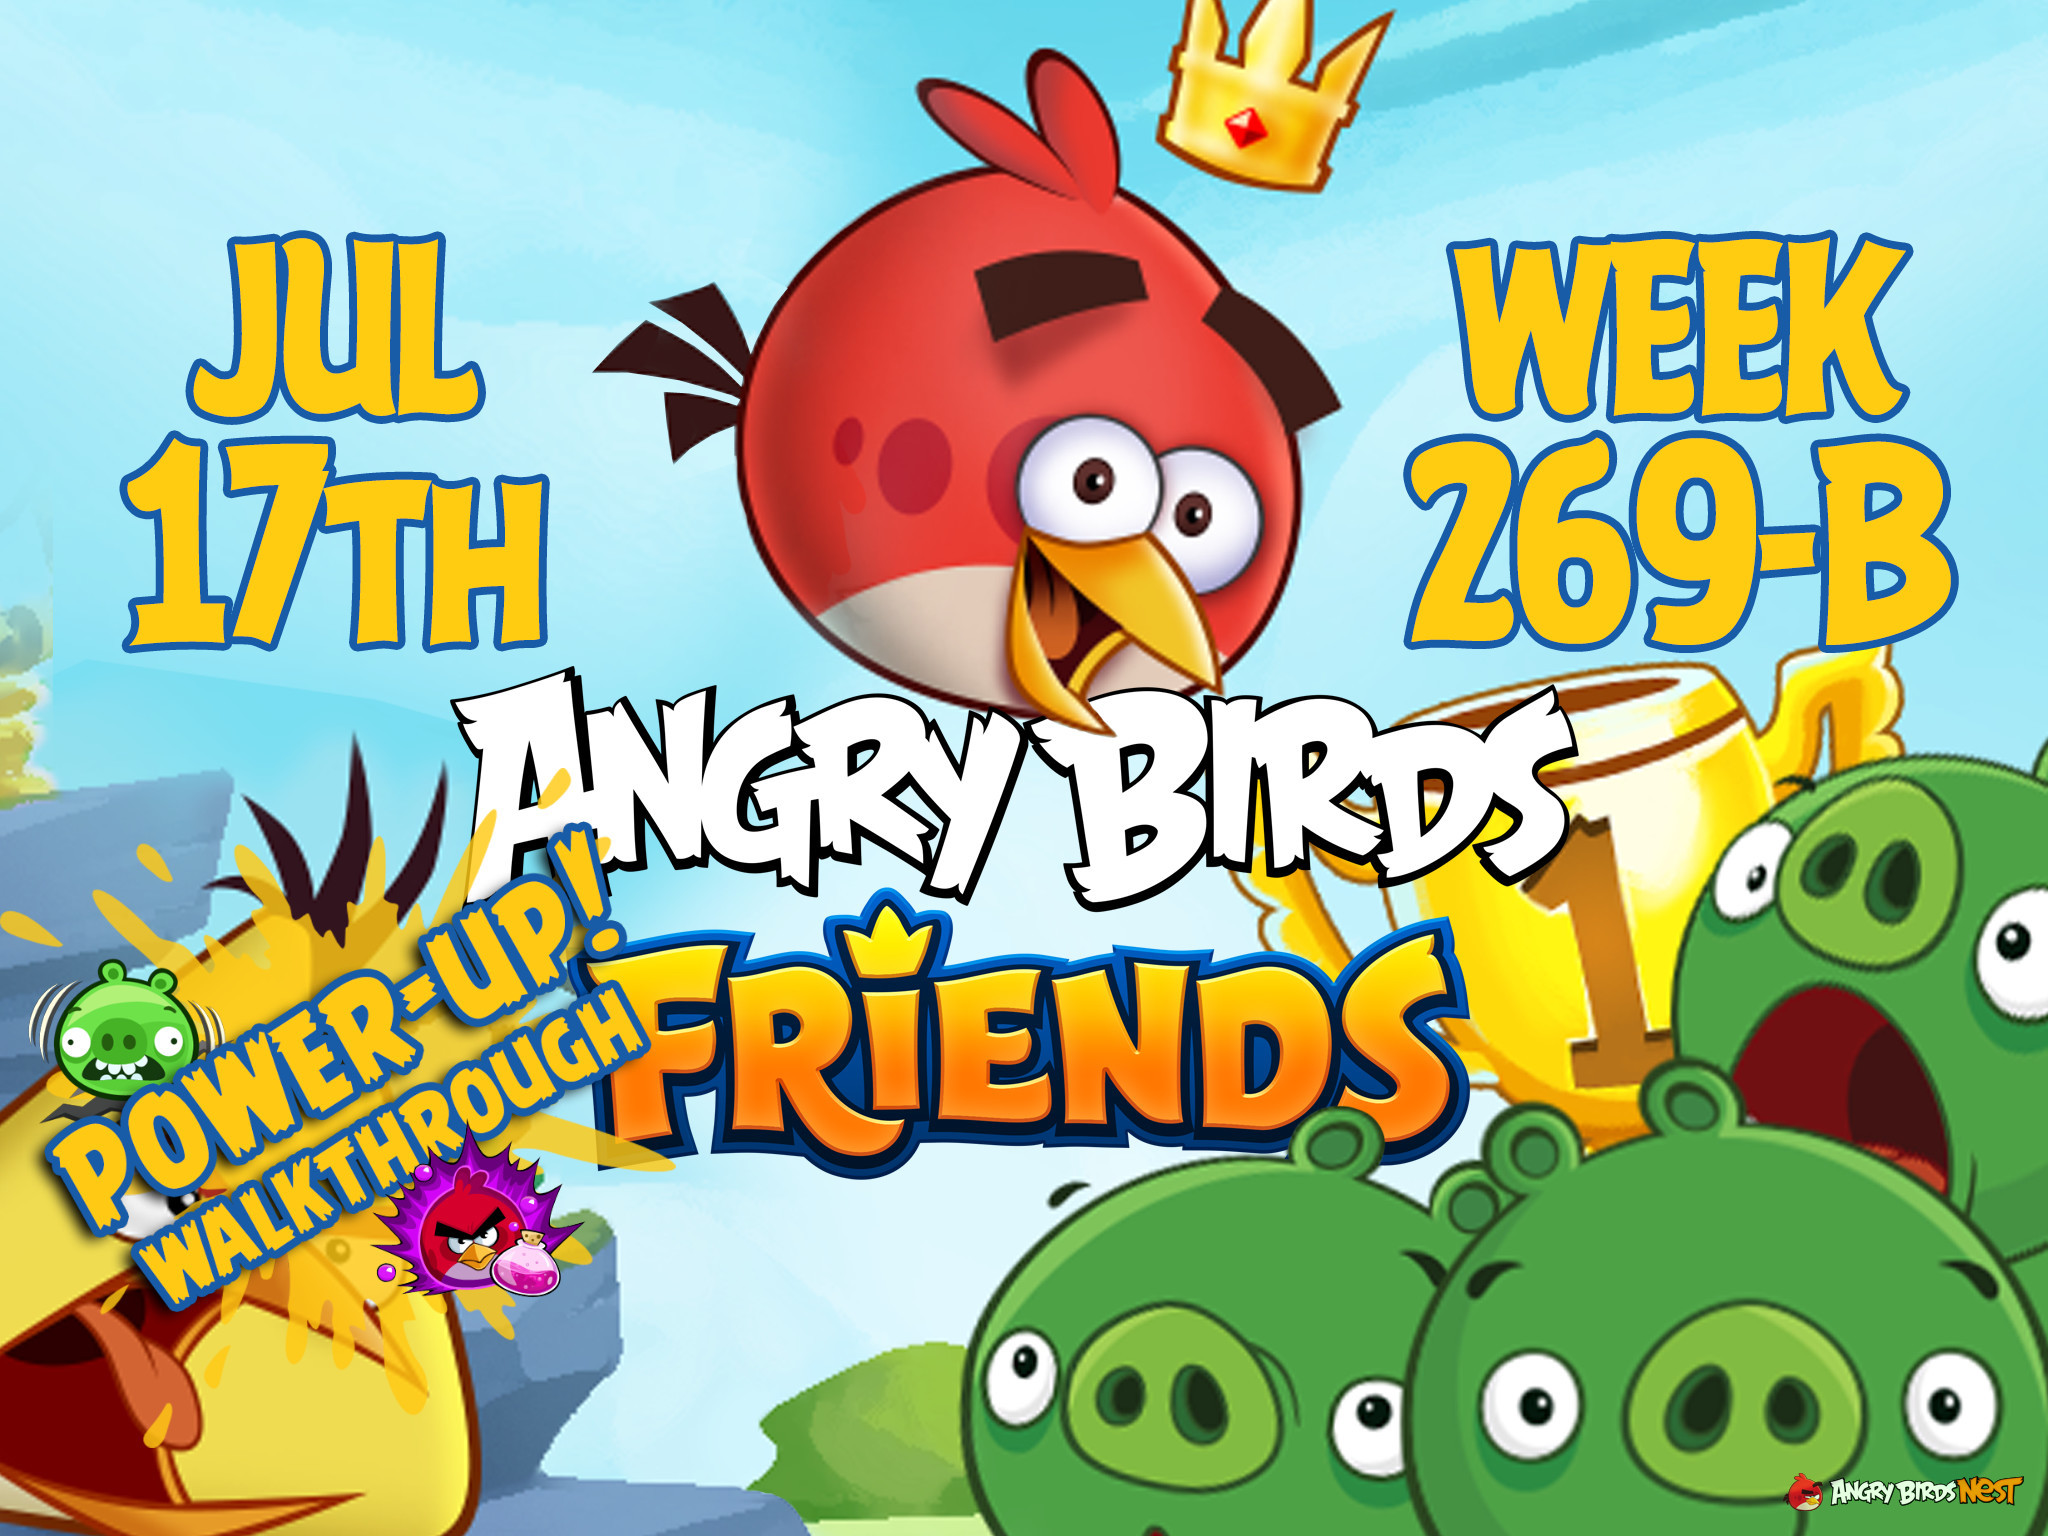 Angry Birds Friends Tournament Week 269-B Feature Image PU